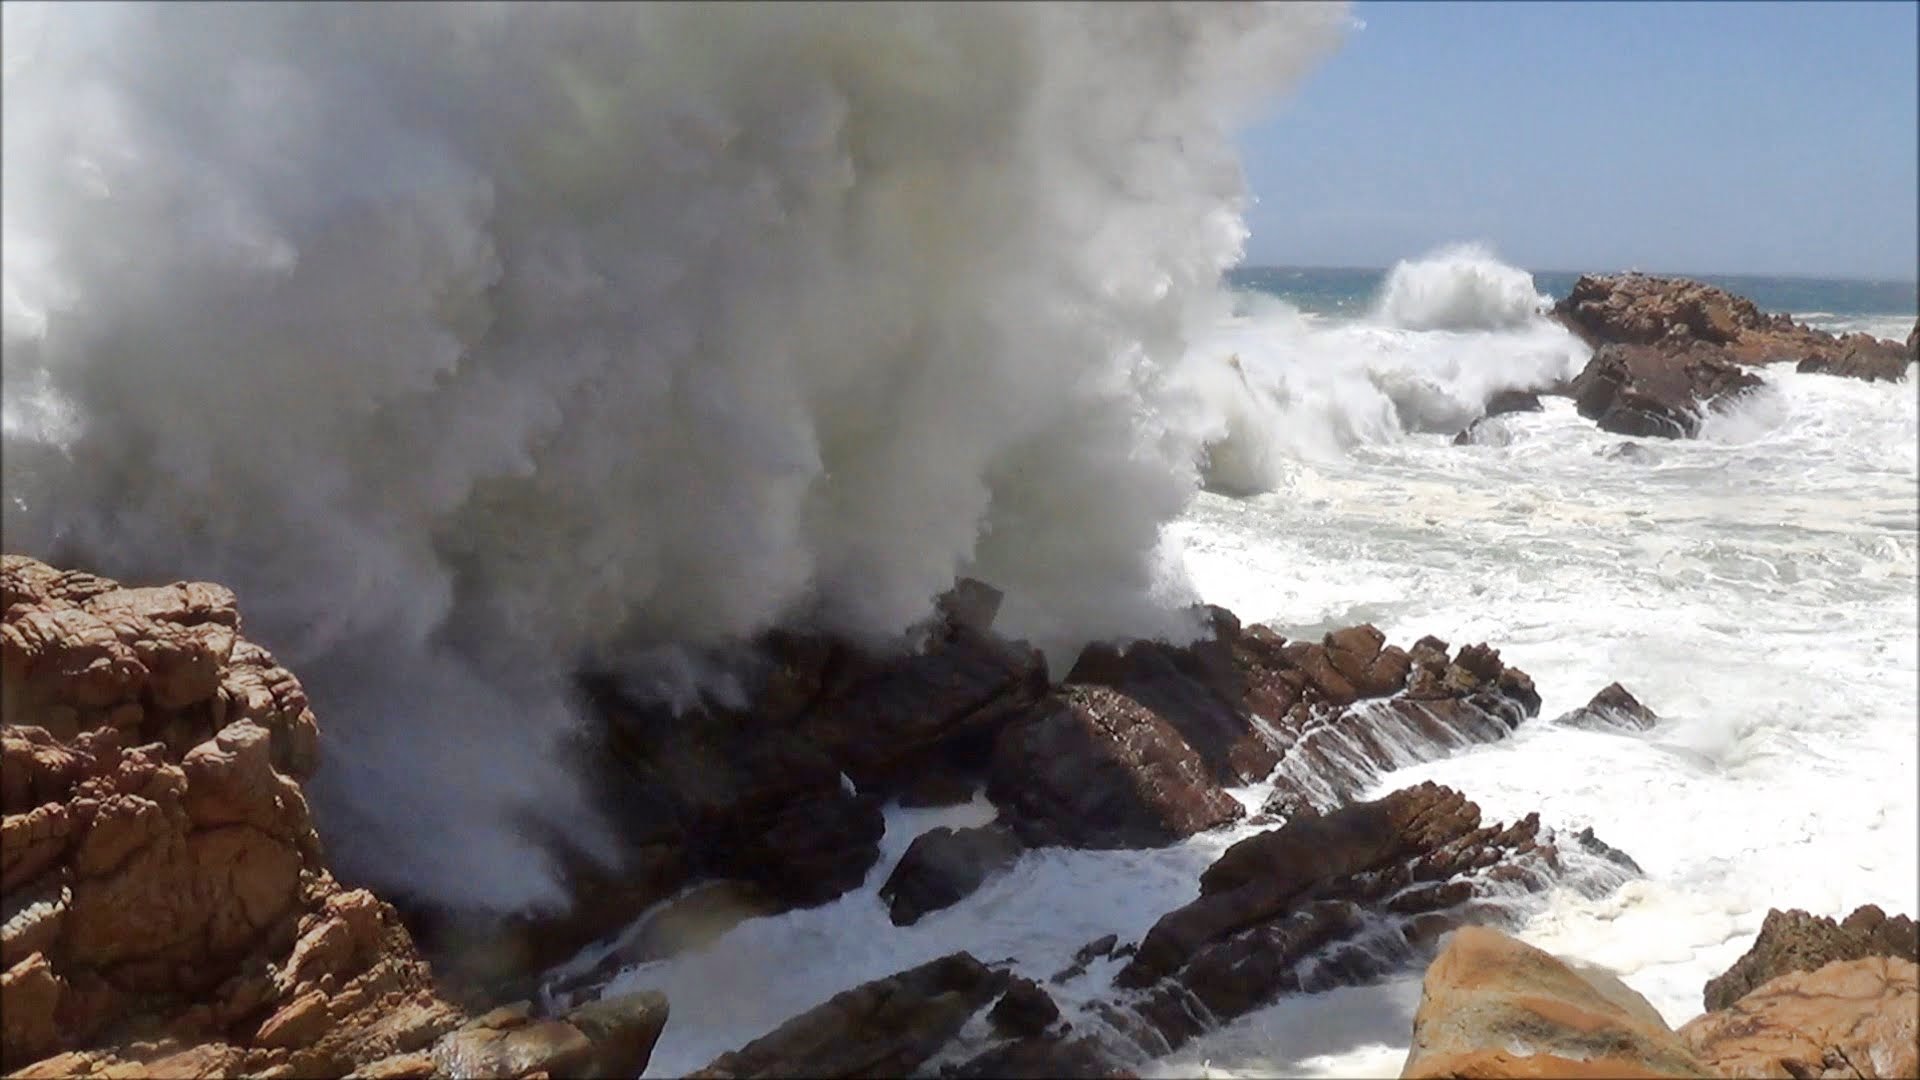 Big ocean waves crashing into rocks and exploding - HD 1080P - YouTube